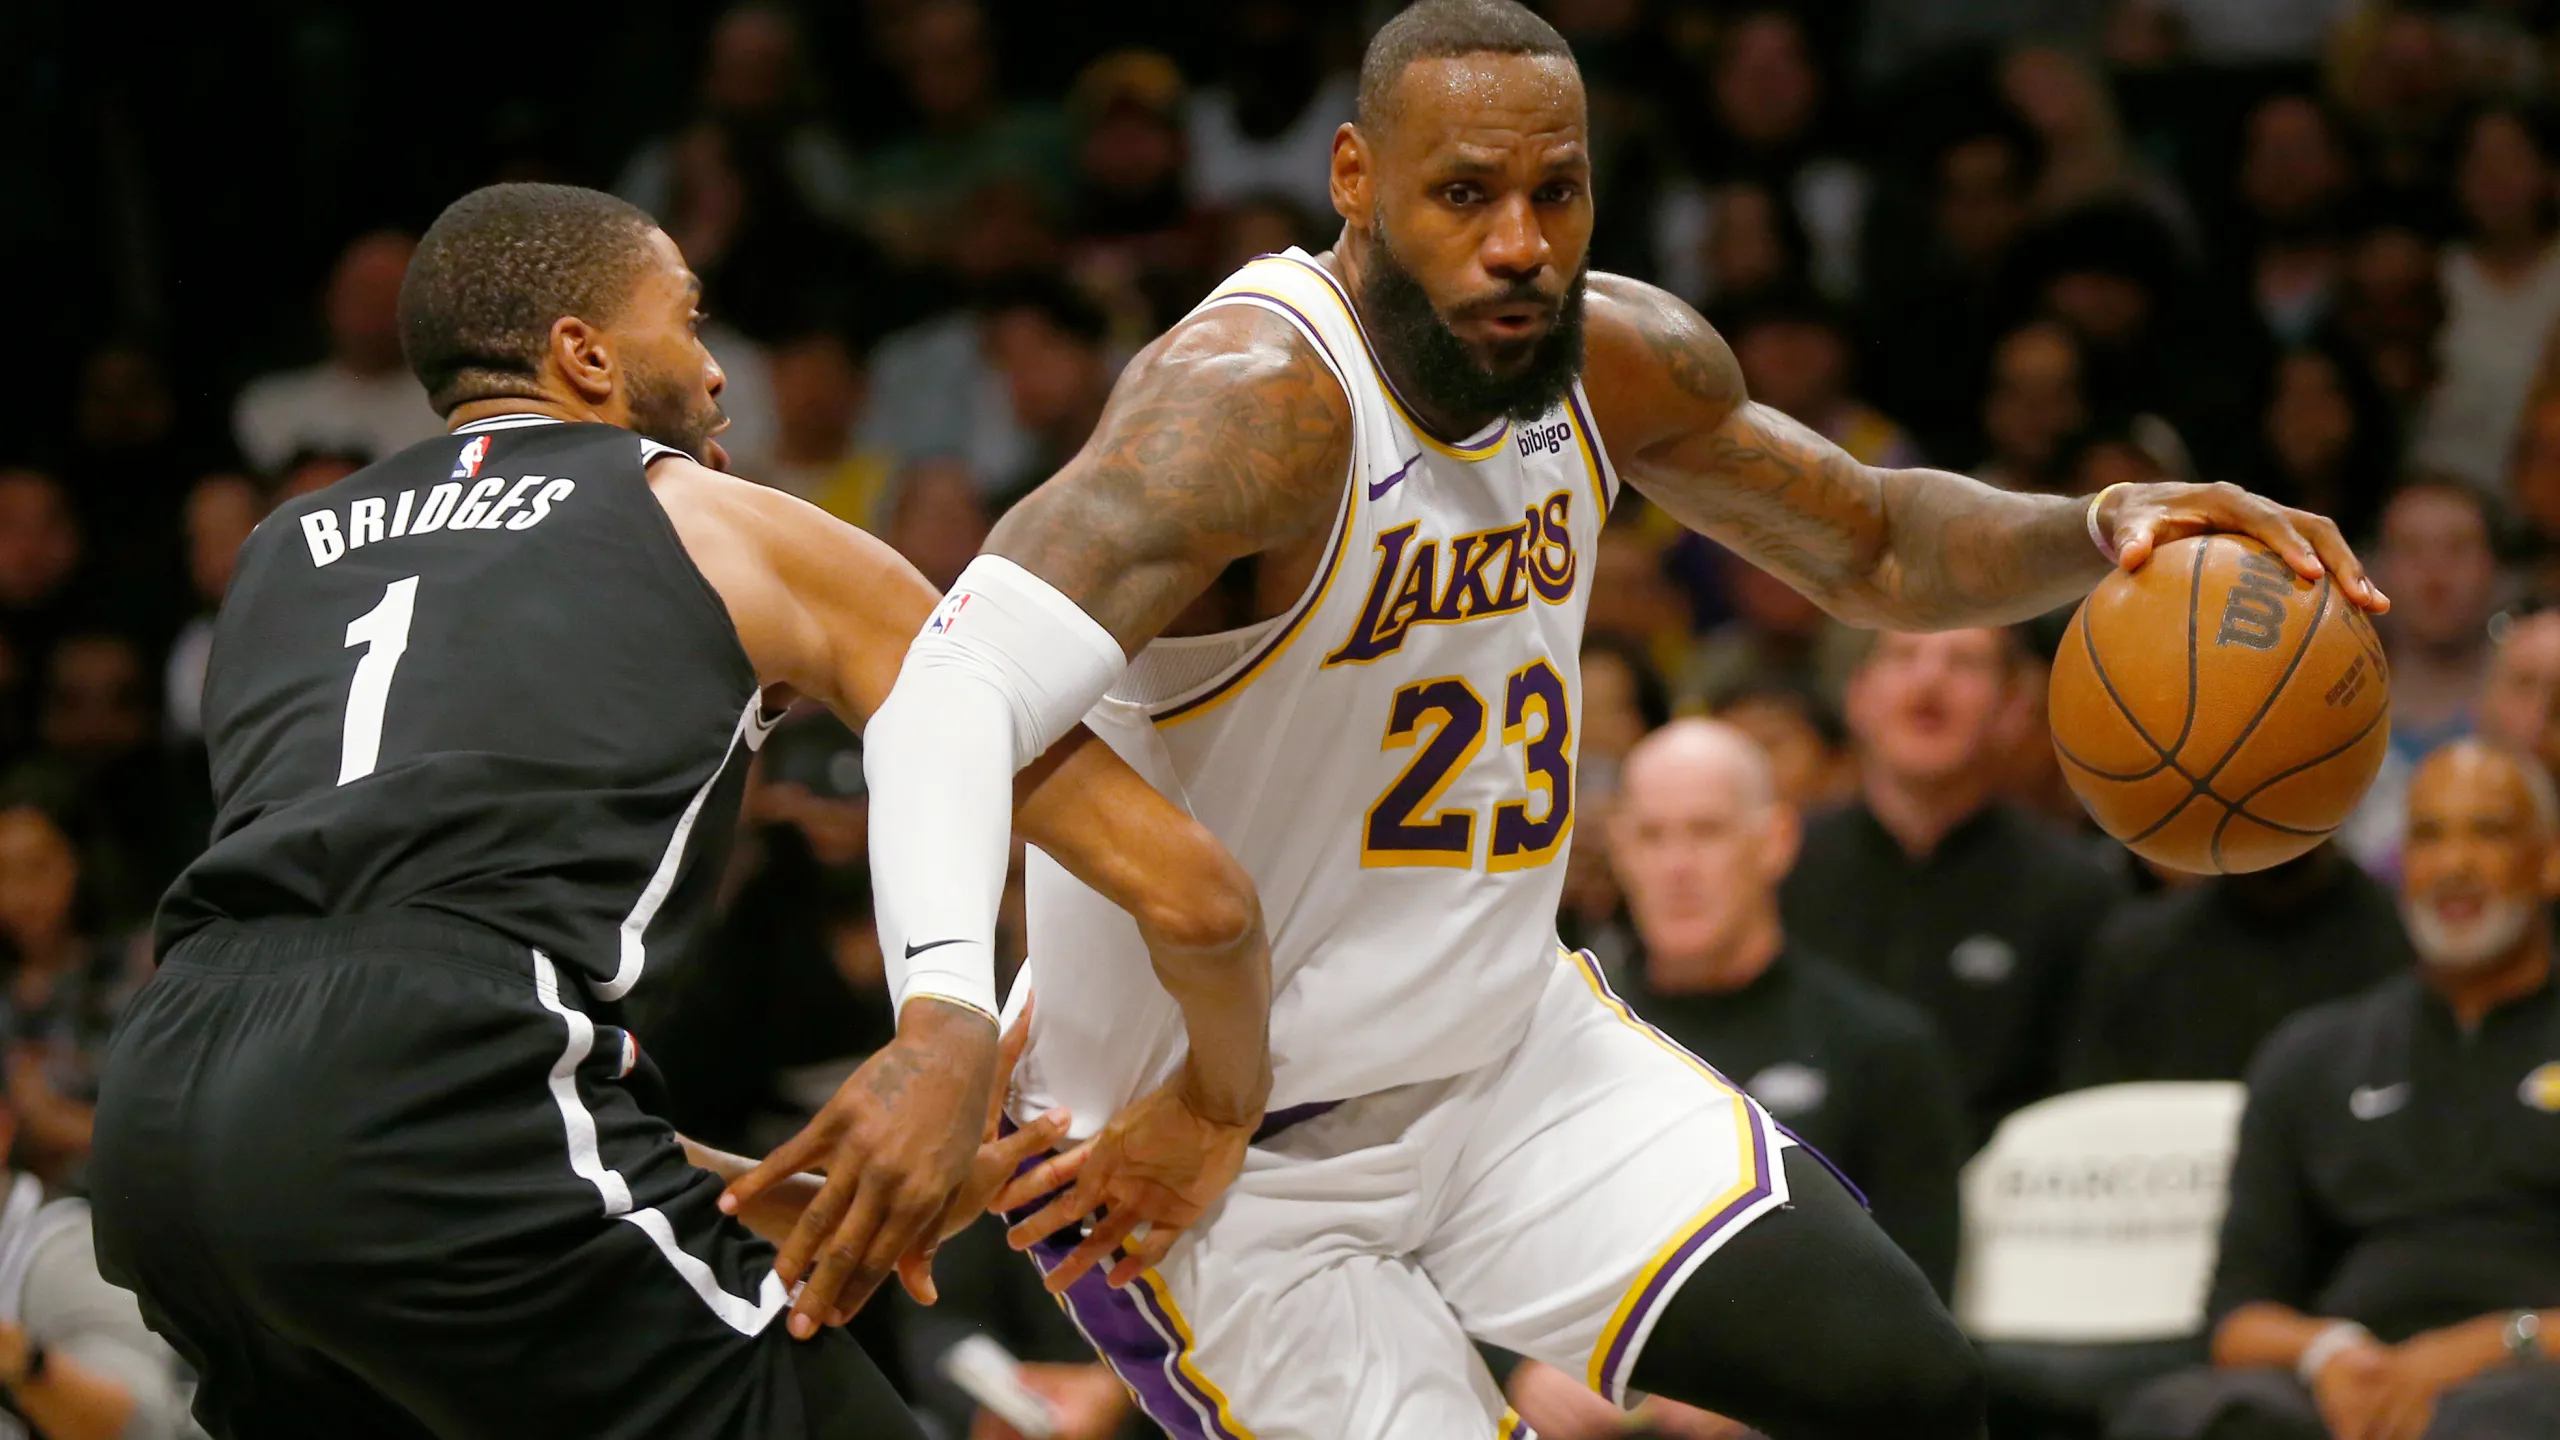 Lebron drops 40 in Brooklyn and hints at retirement